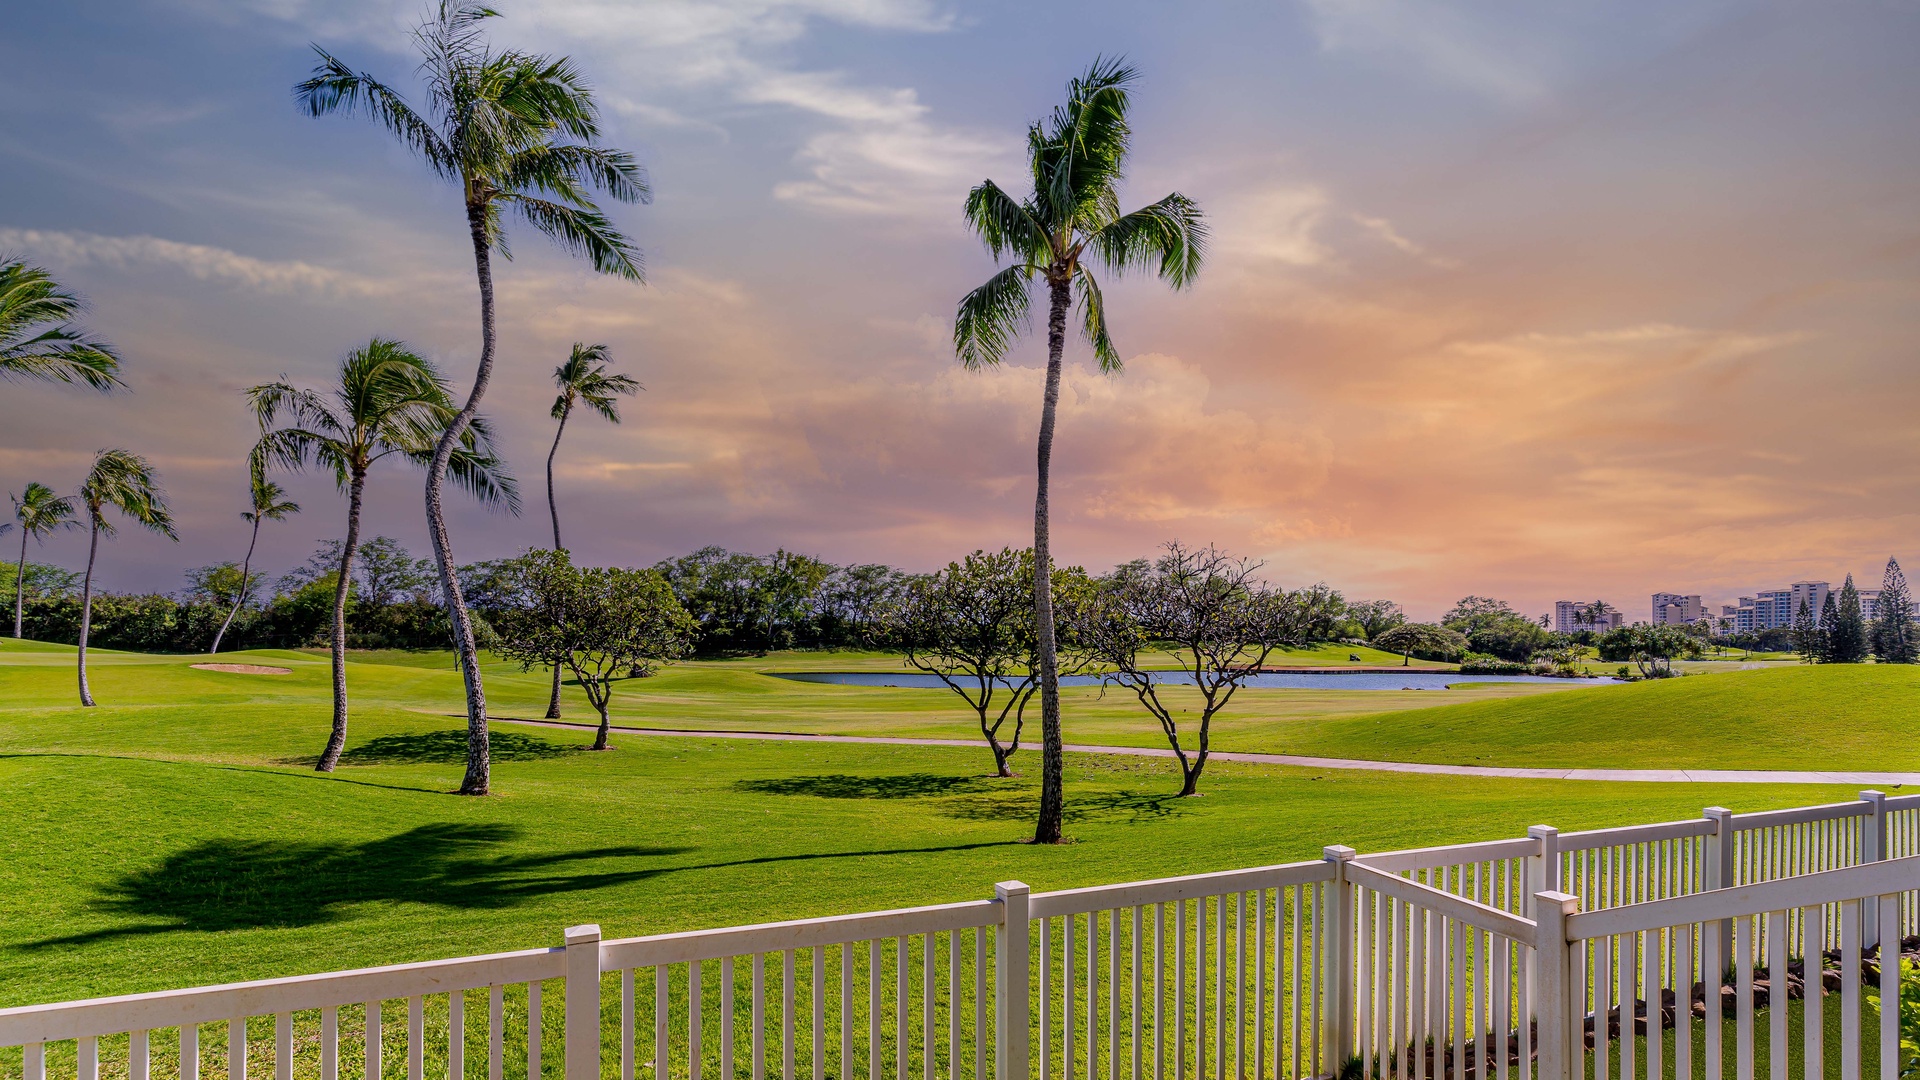 Kapolei Vacation Rentals, Fairways at Ko Olina 20G - Welcome to your little slice of heaven in Hawaii.